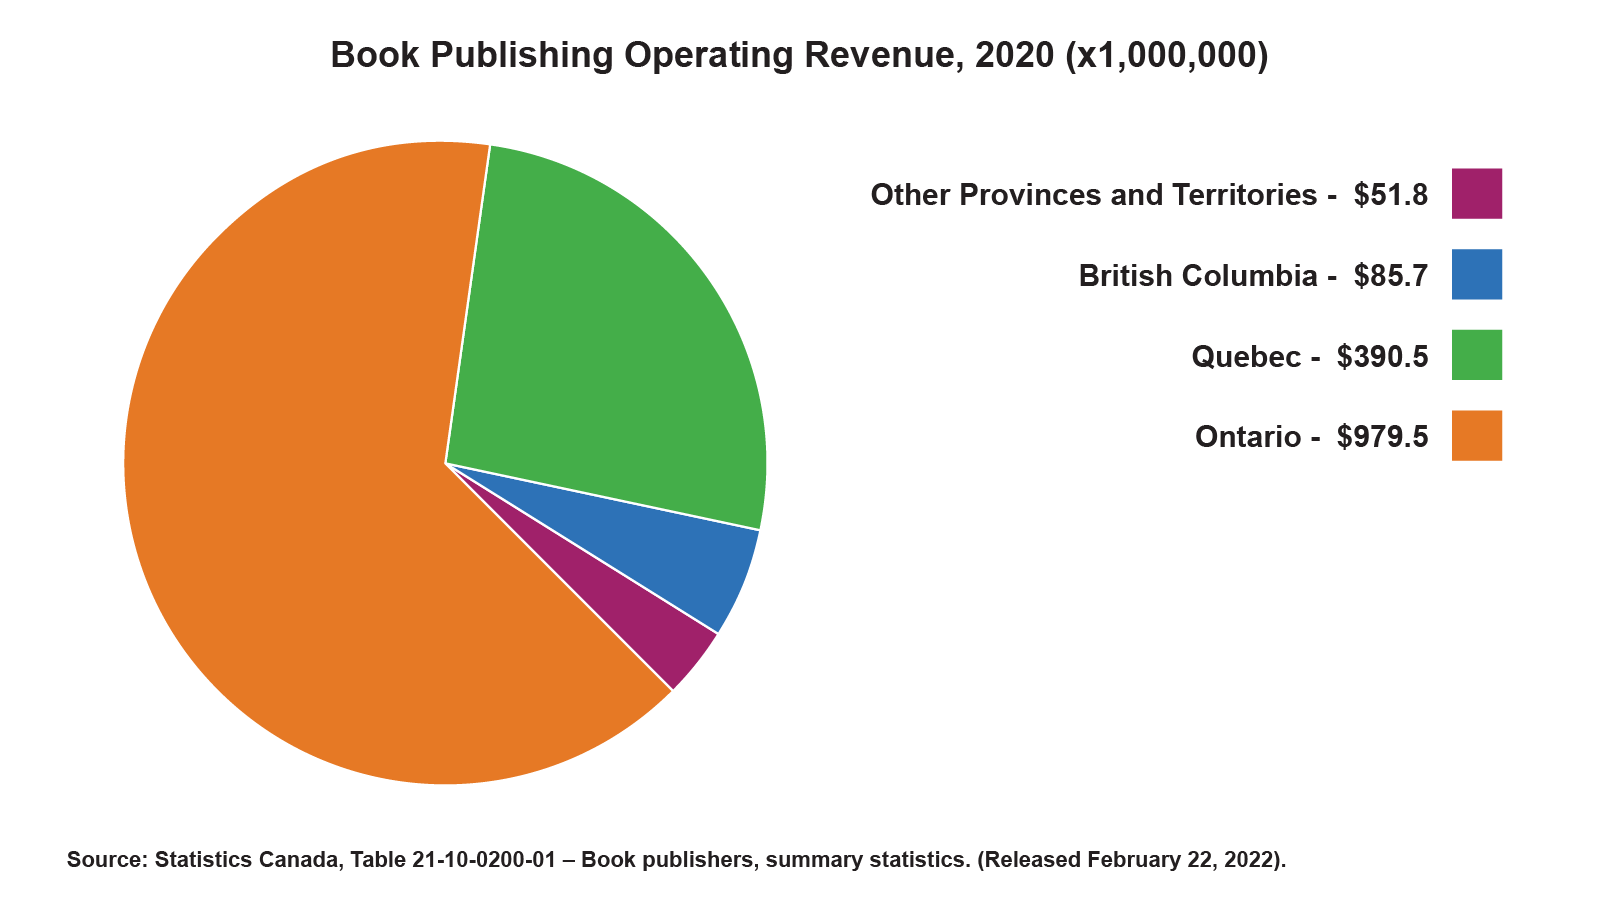 A pie chart depicting book publishing operating revenue by province. Ontario makes up approximately two thirds of the chart, and one quarter taken up by Quebec. Half of the remaining area is British Columbia, followed by all other provinces and territories combined.